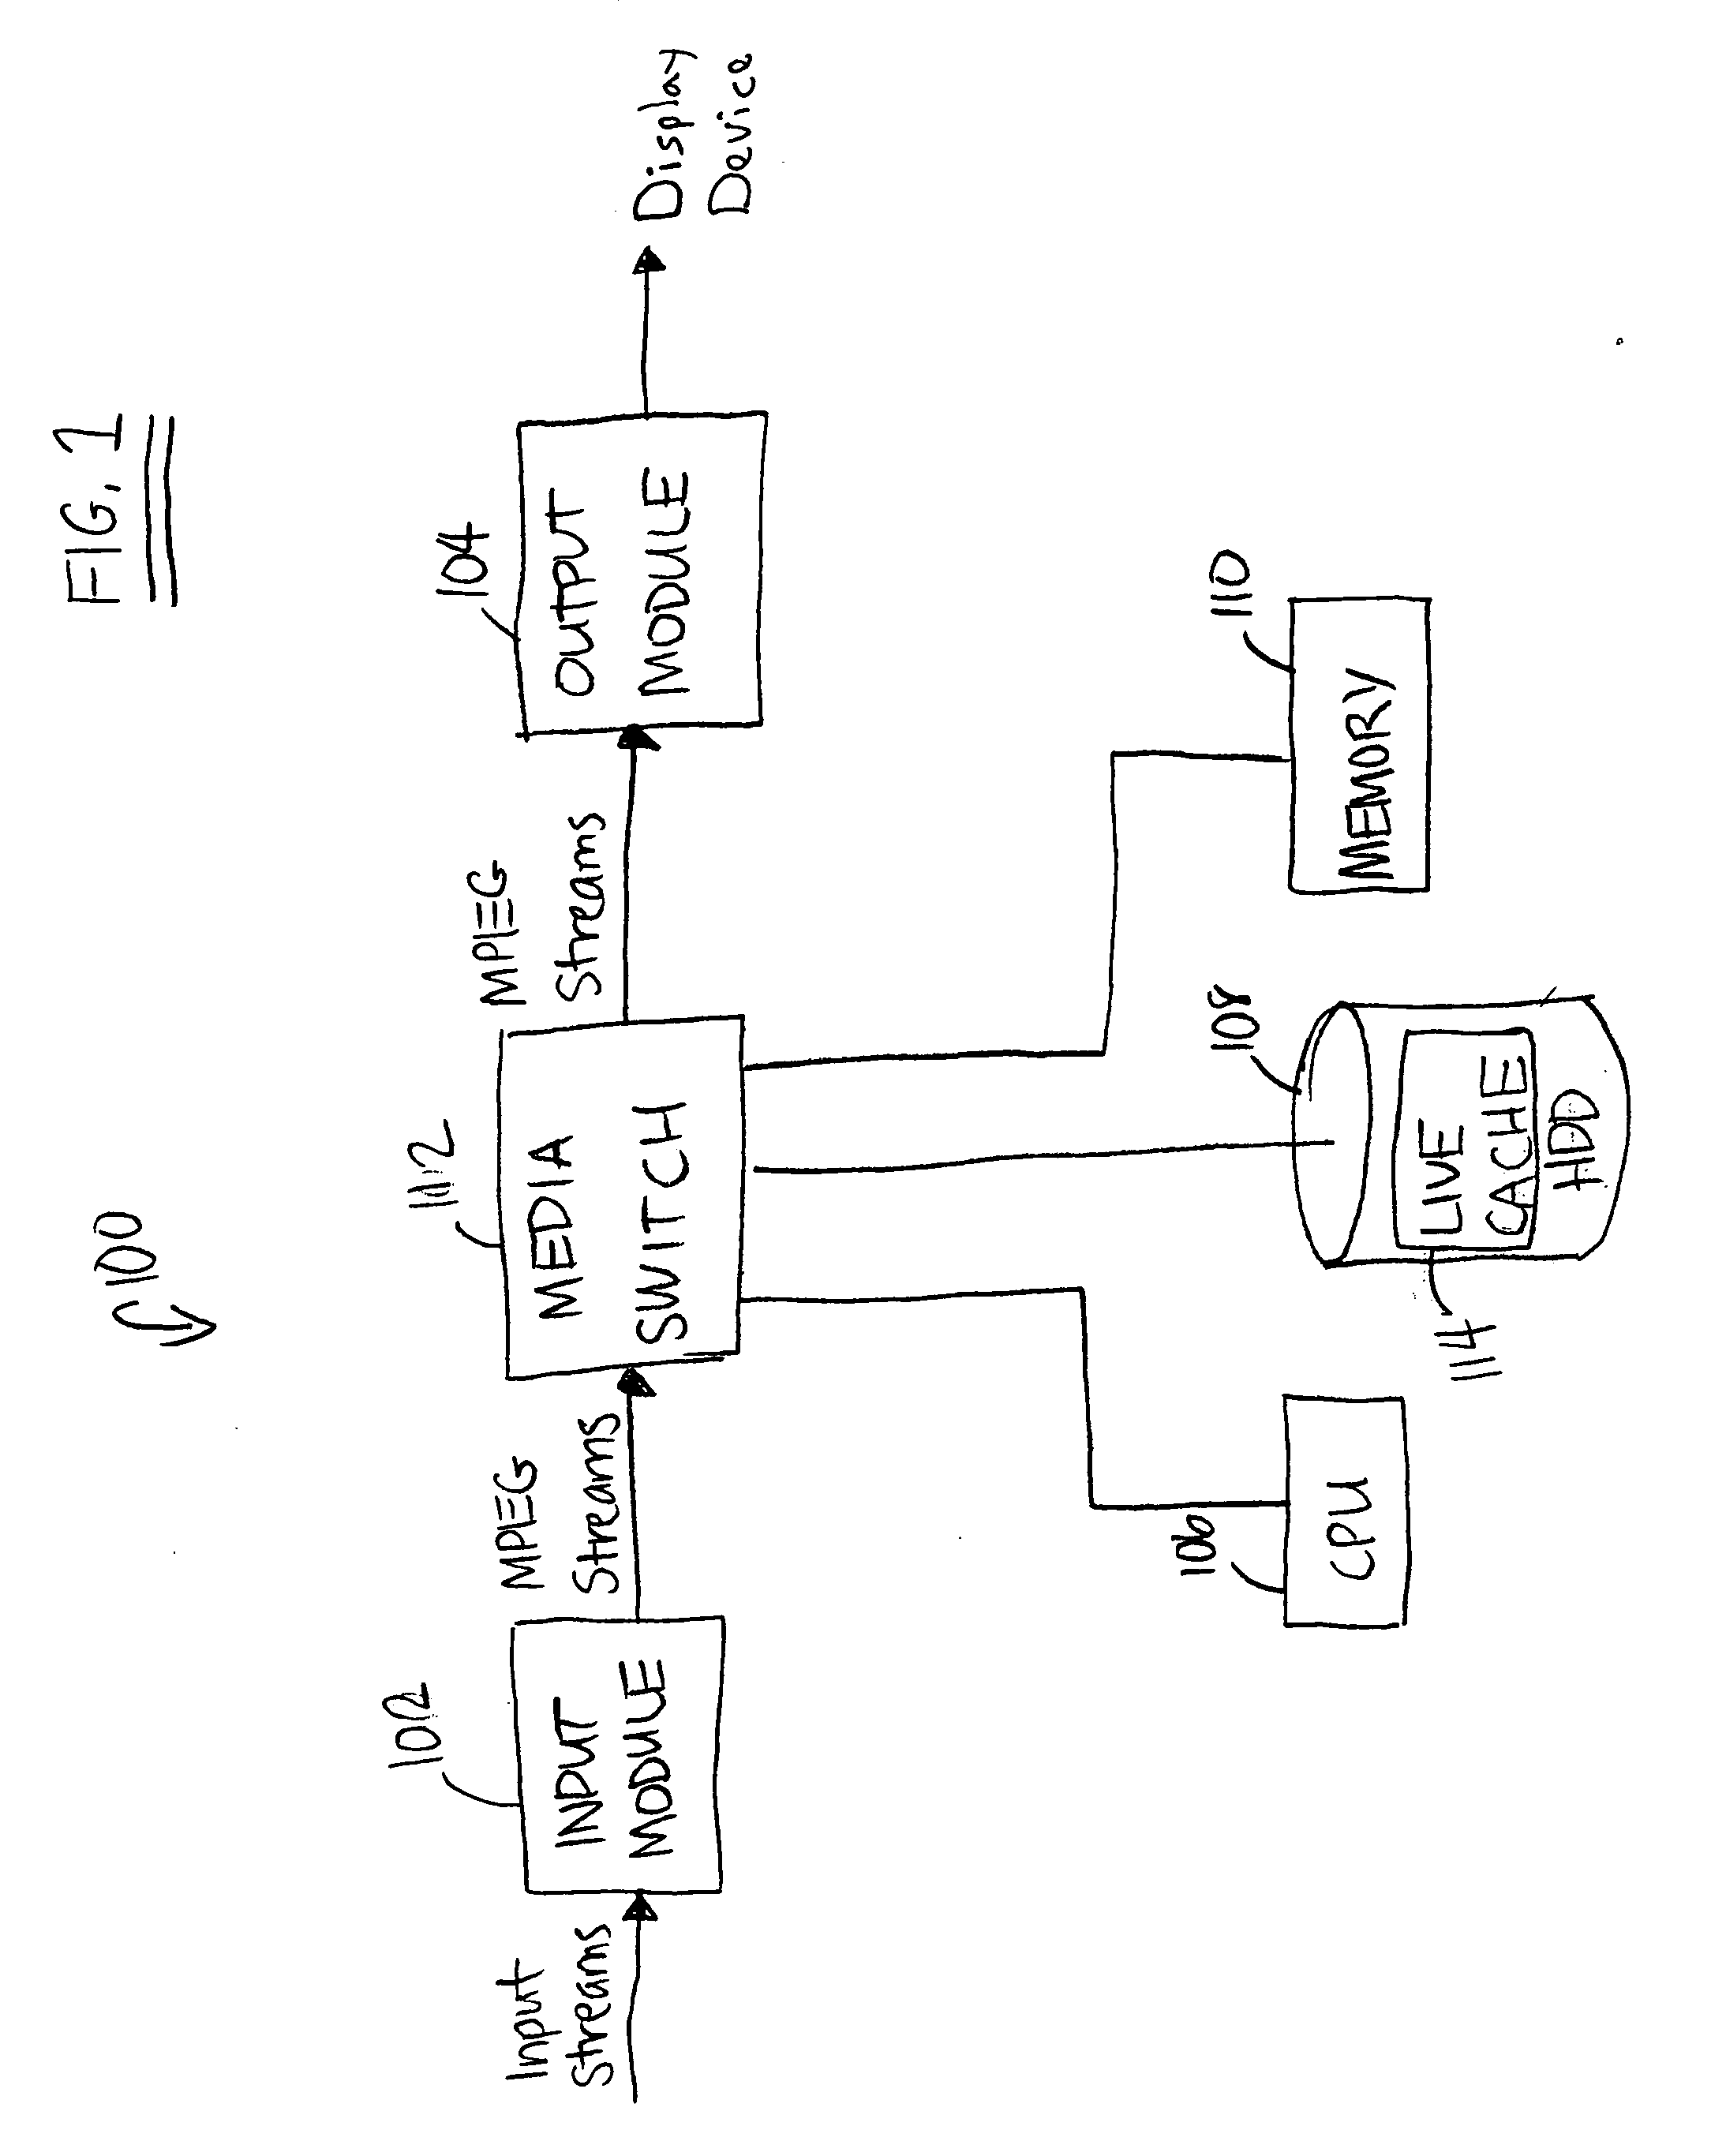 Method and apparatus for customizing content navigation